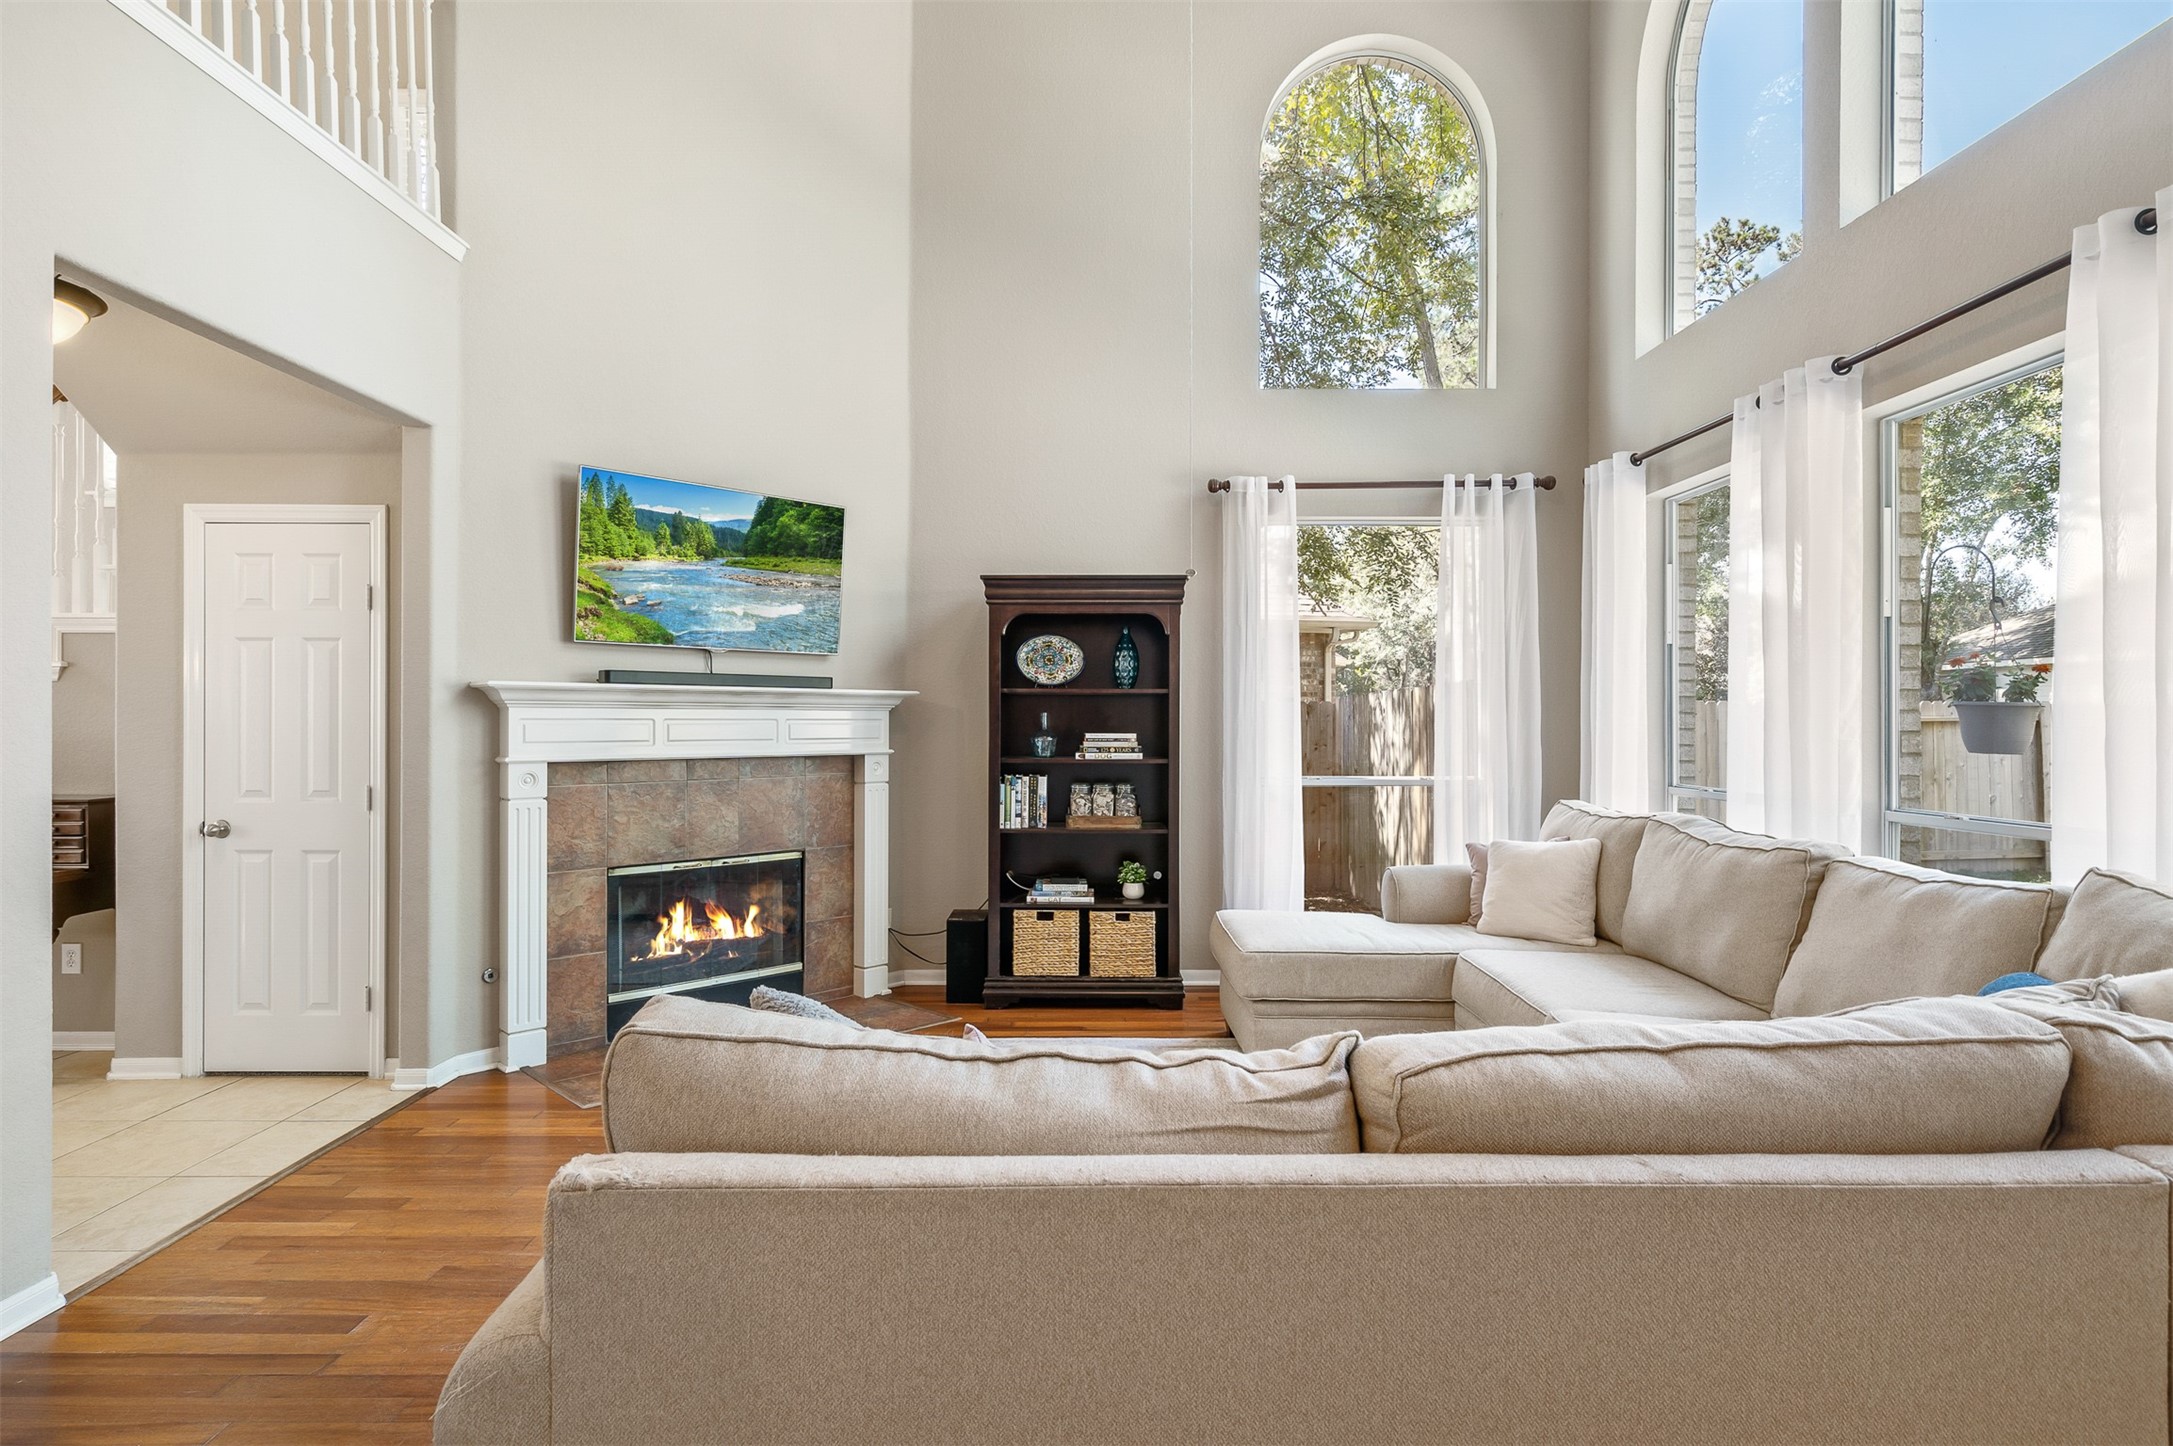 Hardwood floors in the great room, gas fireplace and plenty of room for seating!